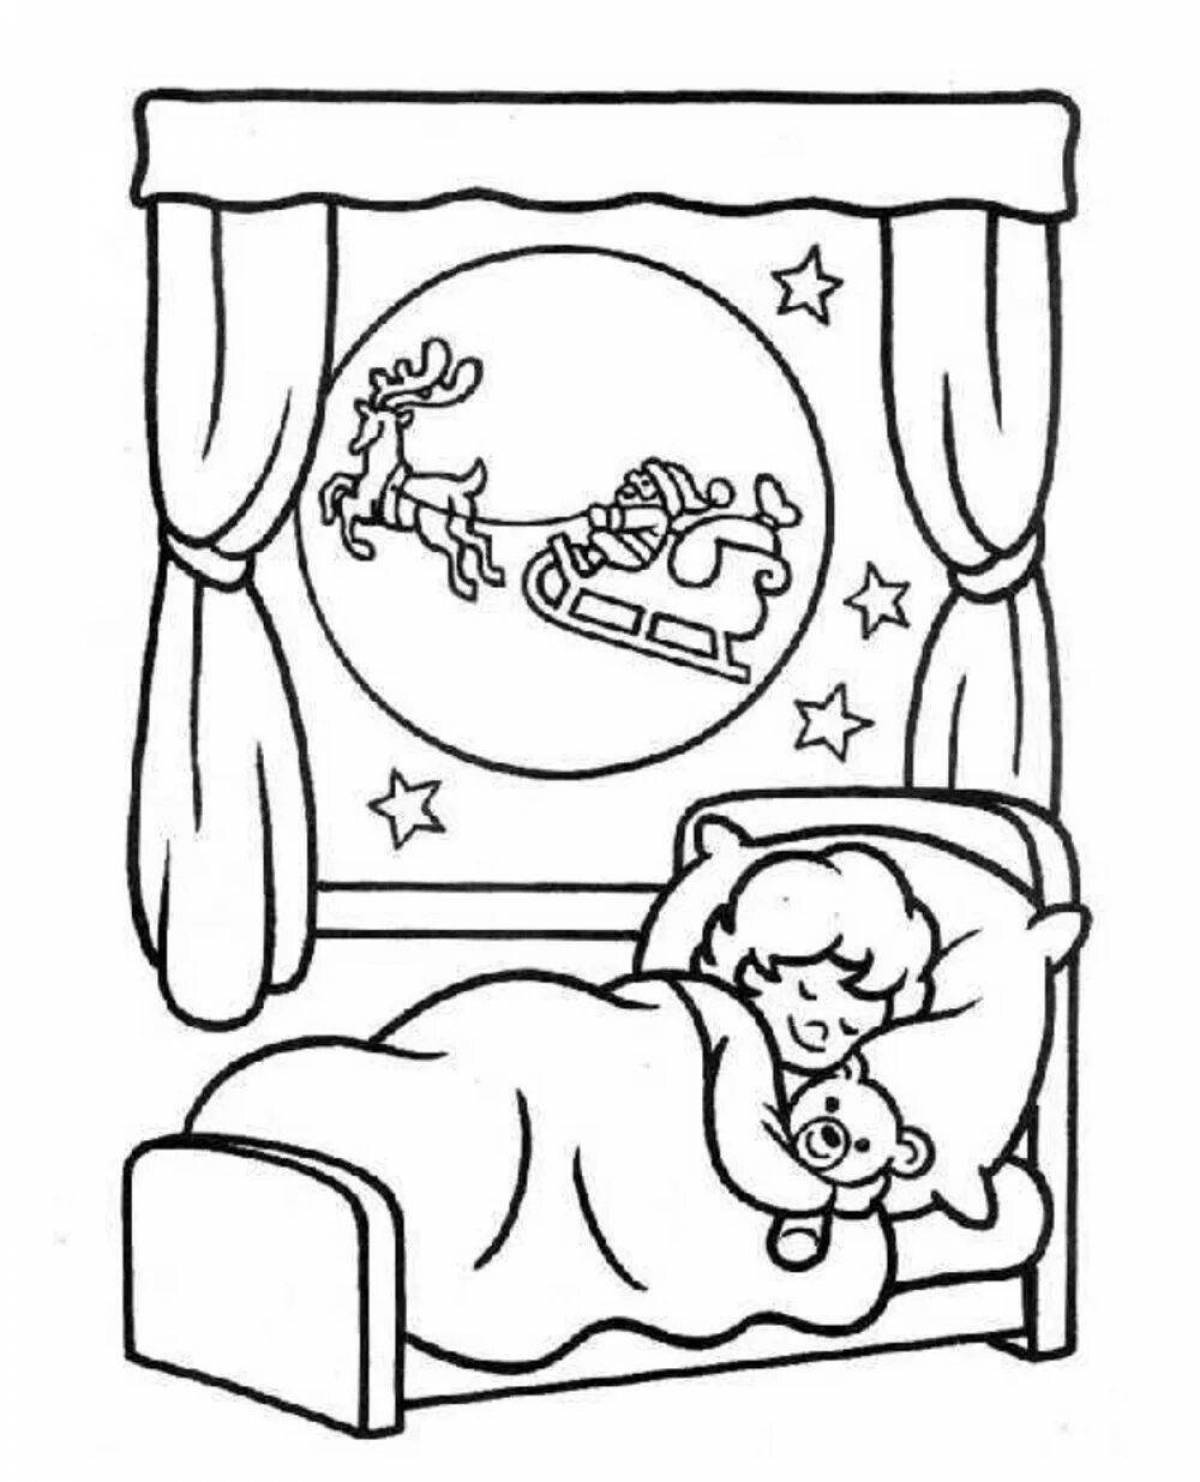 Cosy sleeping baby coloring page